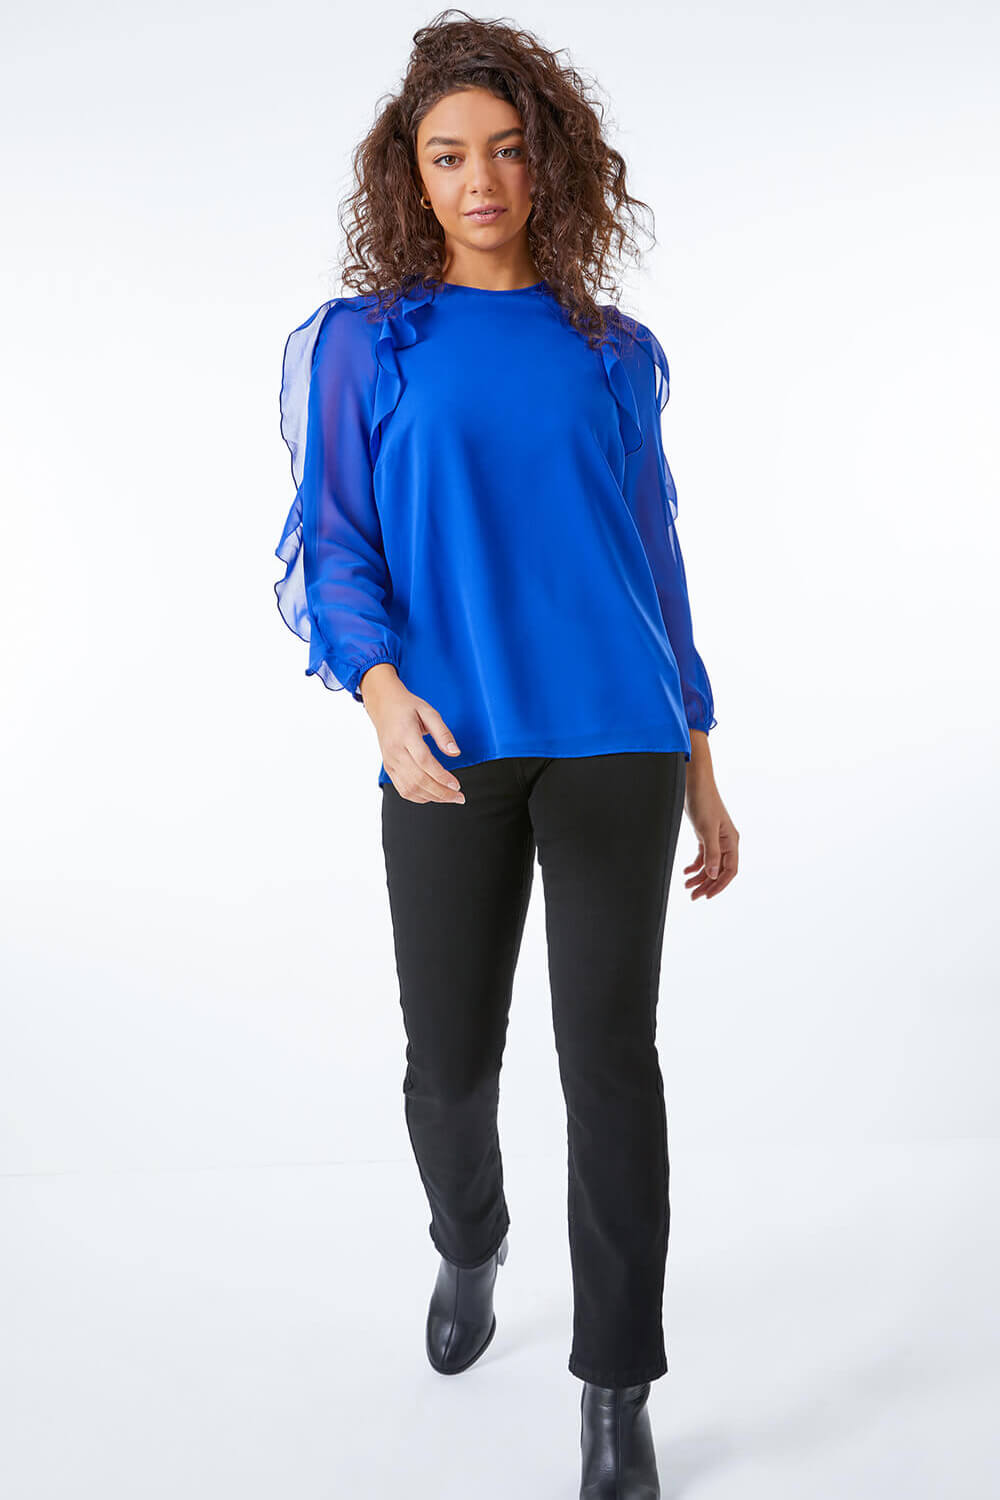 Royal Blue Petite Frill Sleeve Top, Image 4 of 5